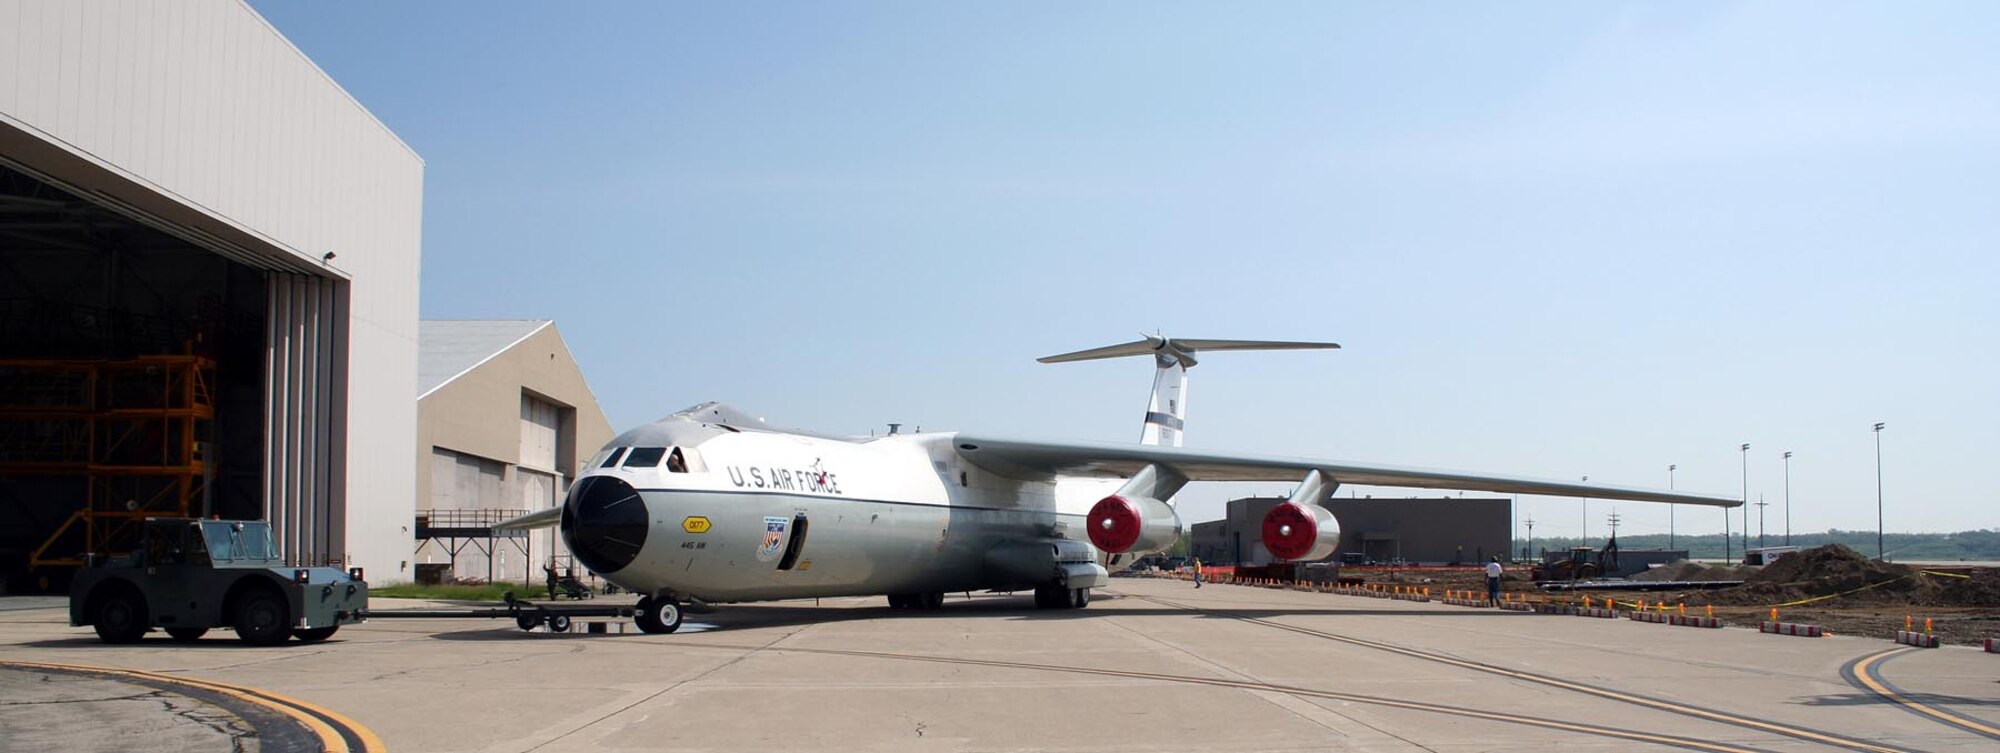 A maintenance 'tug' pushes a C-141 Starlifter known as the 'Hanoi Taxi' out of a maintenance hangar at Wright-Patterson Air Force Base, Ohio on Wednesday. The aircraft is set for retirement and enshrinement into the National Air Force Museum in Dayton, Ohio on Saturday May 6.